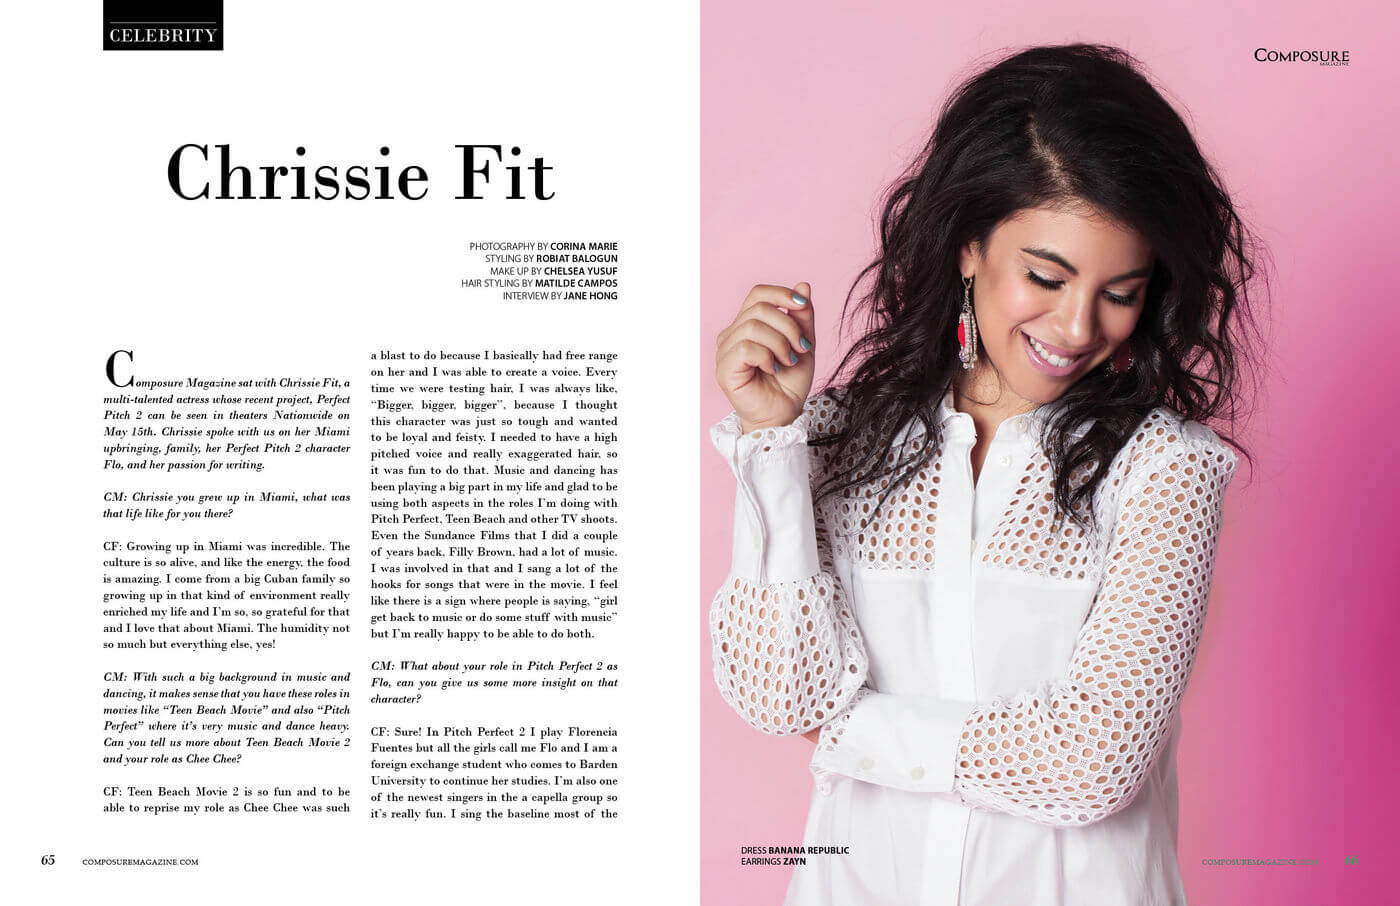 chrissie fit as chee chee